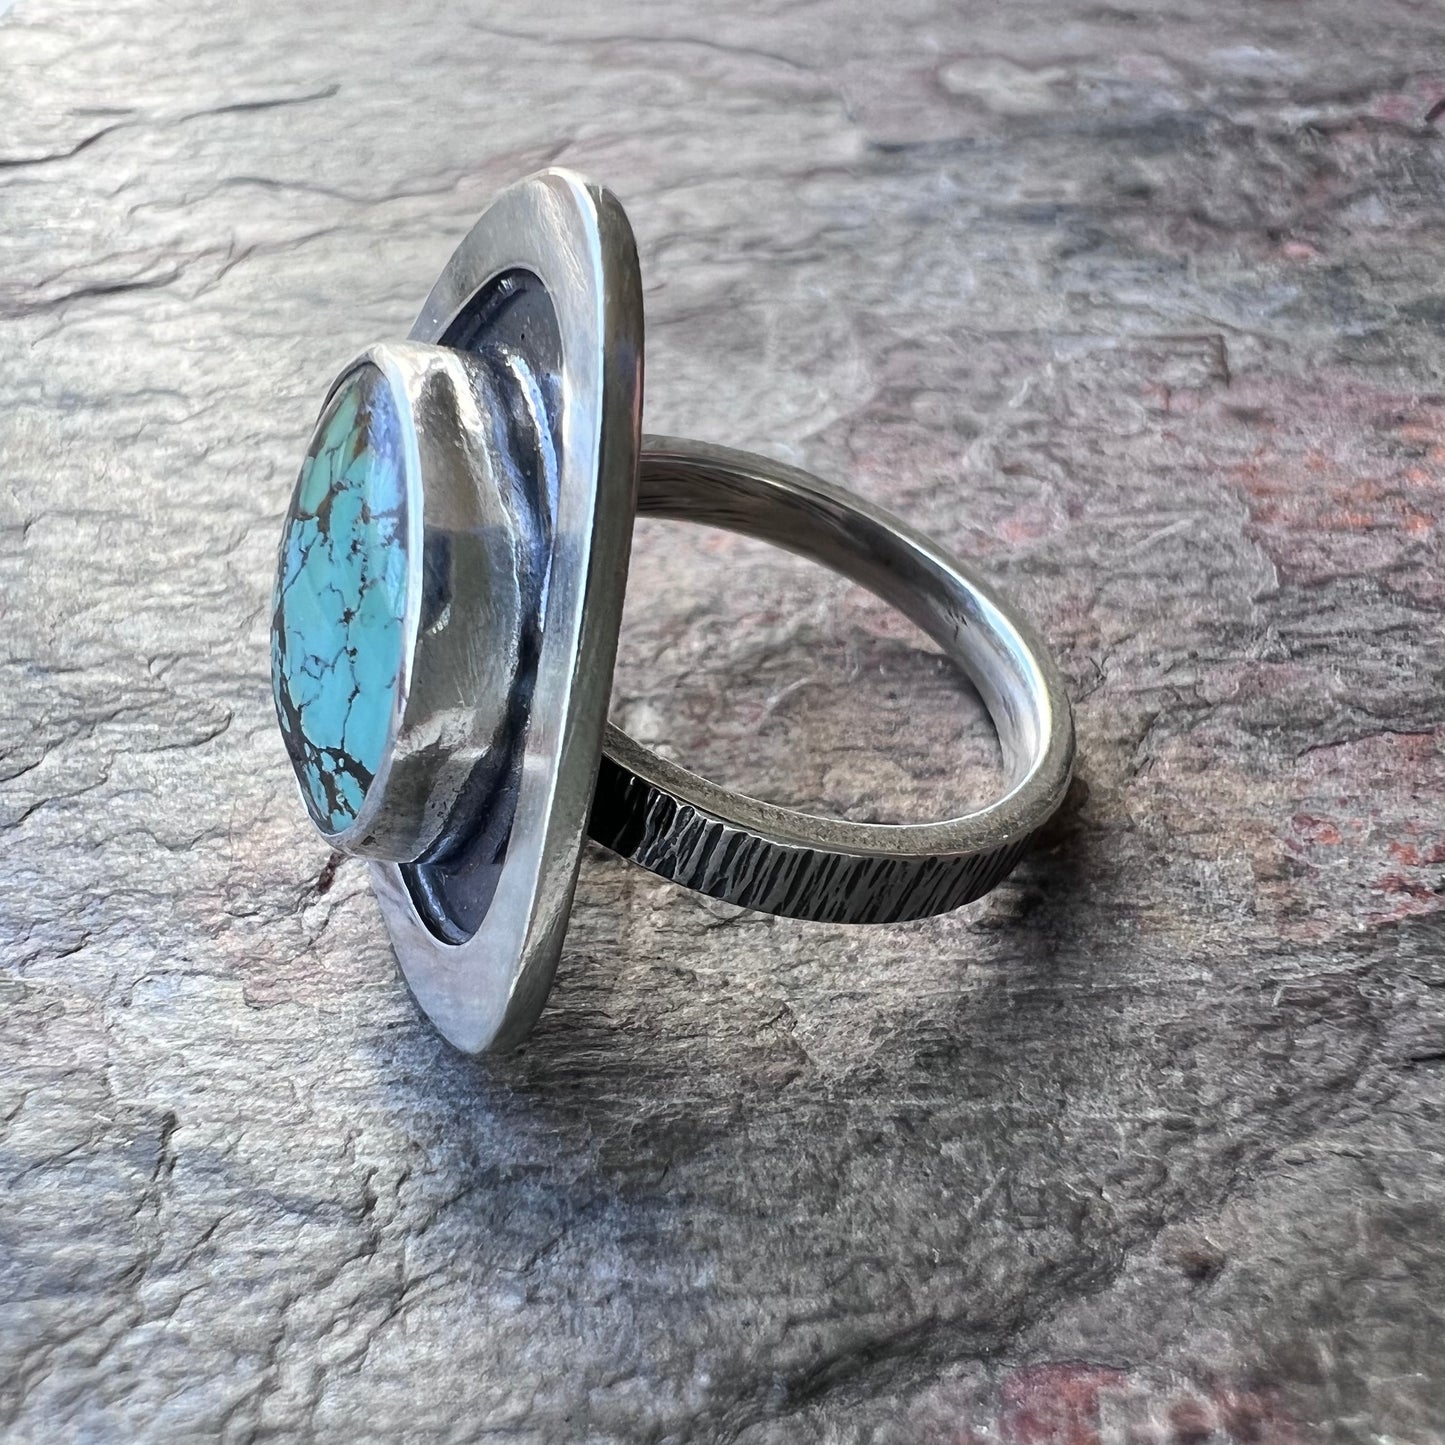 Turquoise Sterling Silver Ring - Genuine Turquoise Handmade One-of-a-kind Artisan Ring - Size 8.5